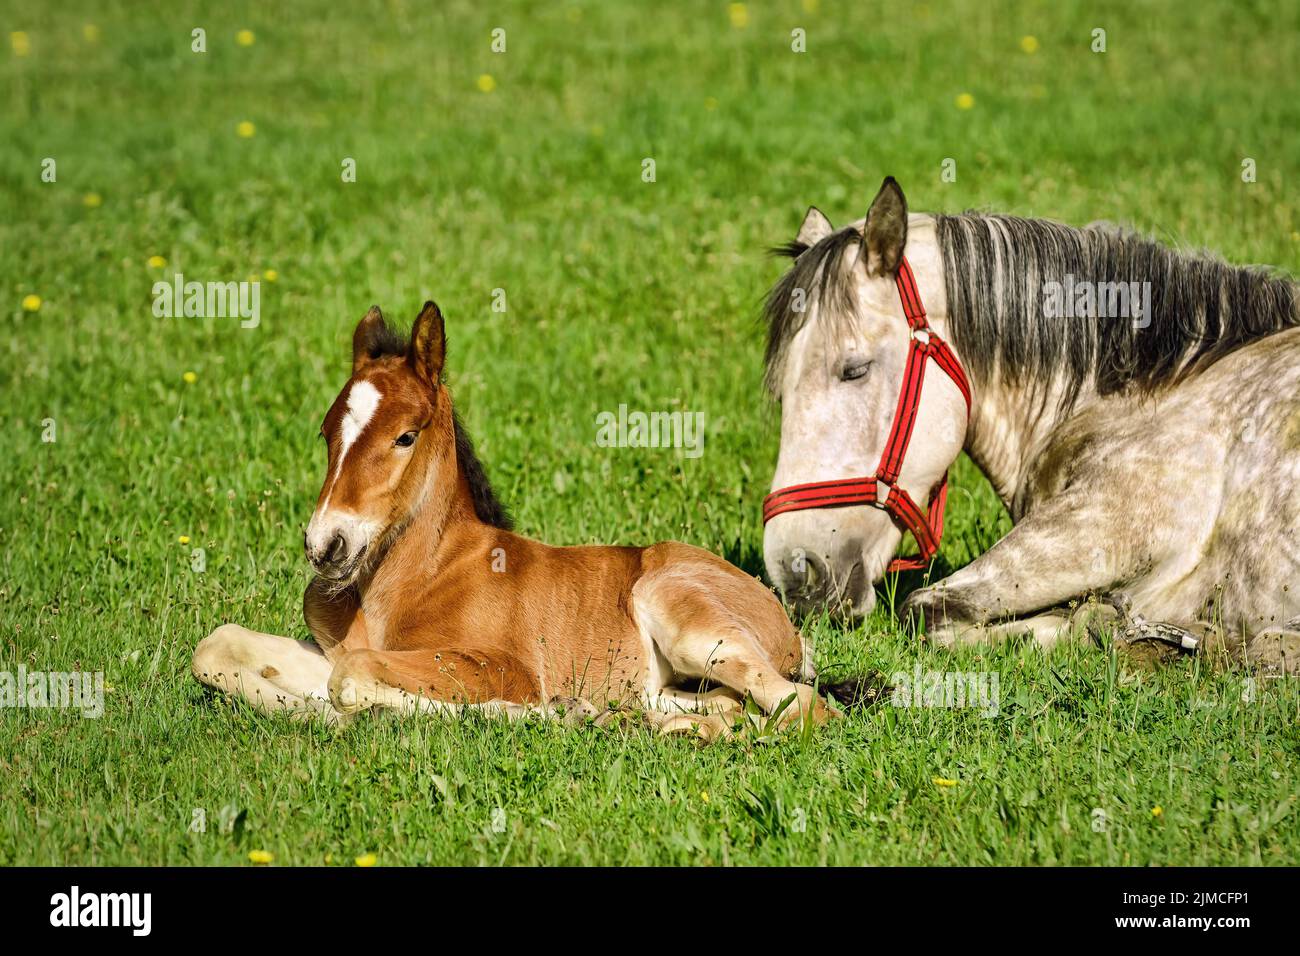 Horse with Foal Stock Photo